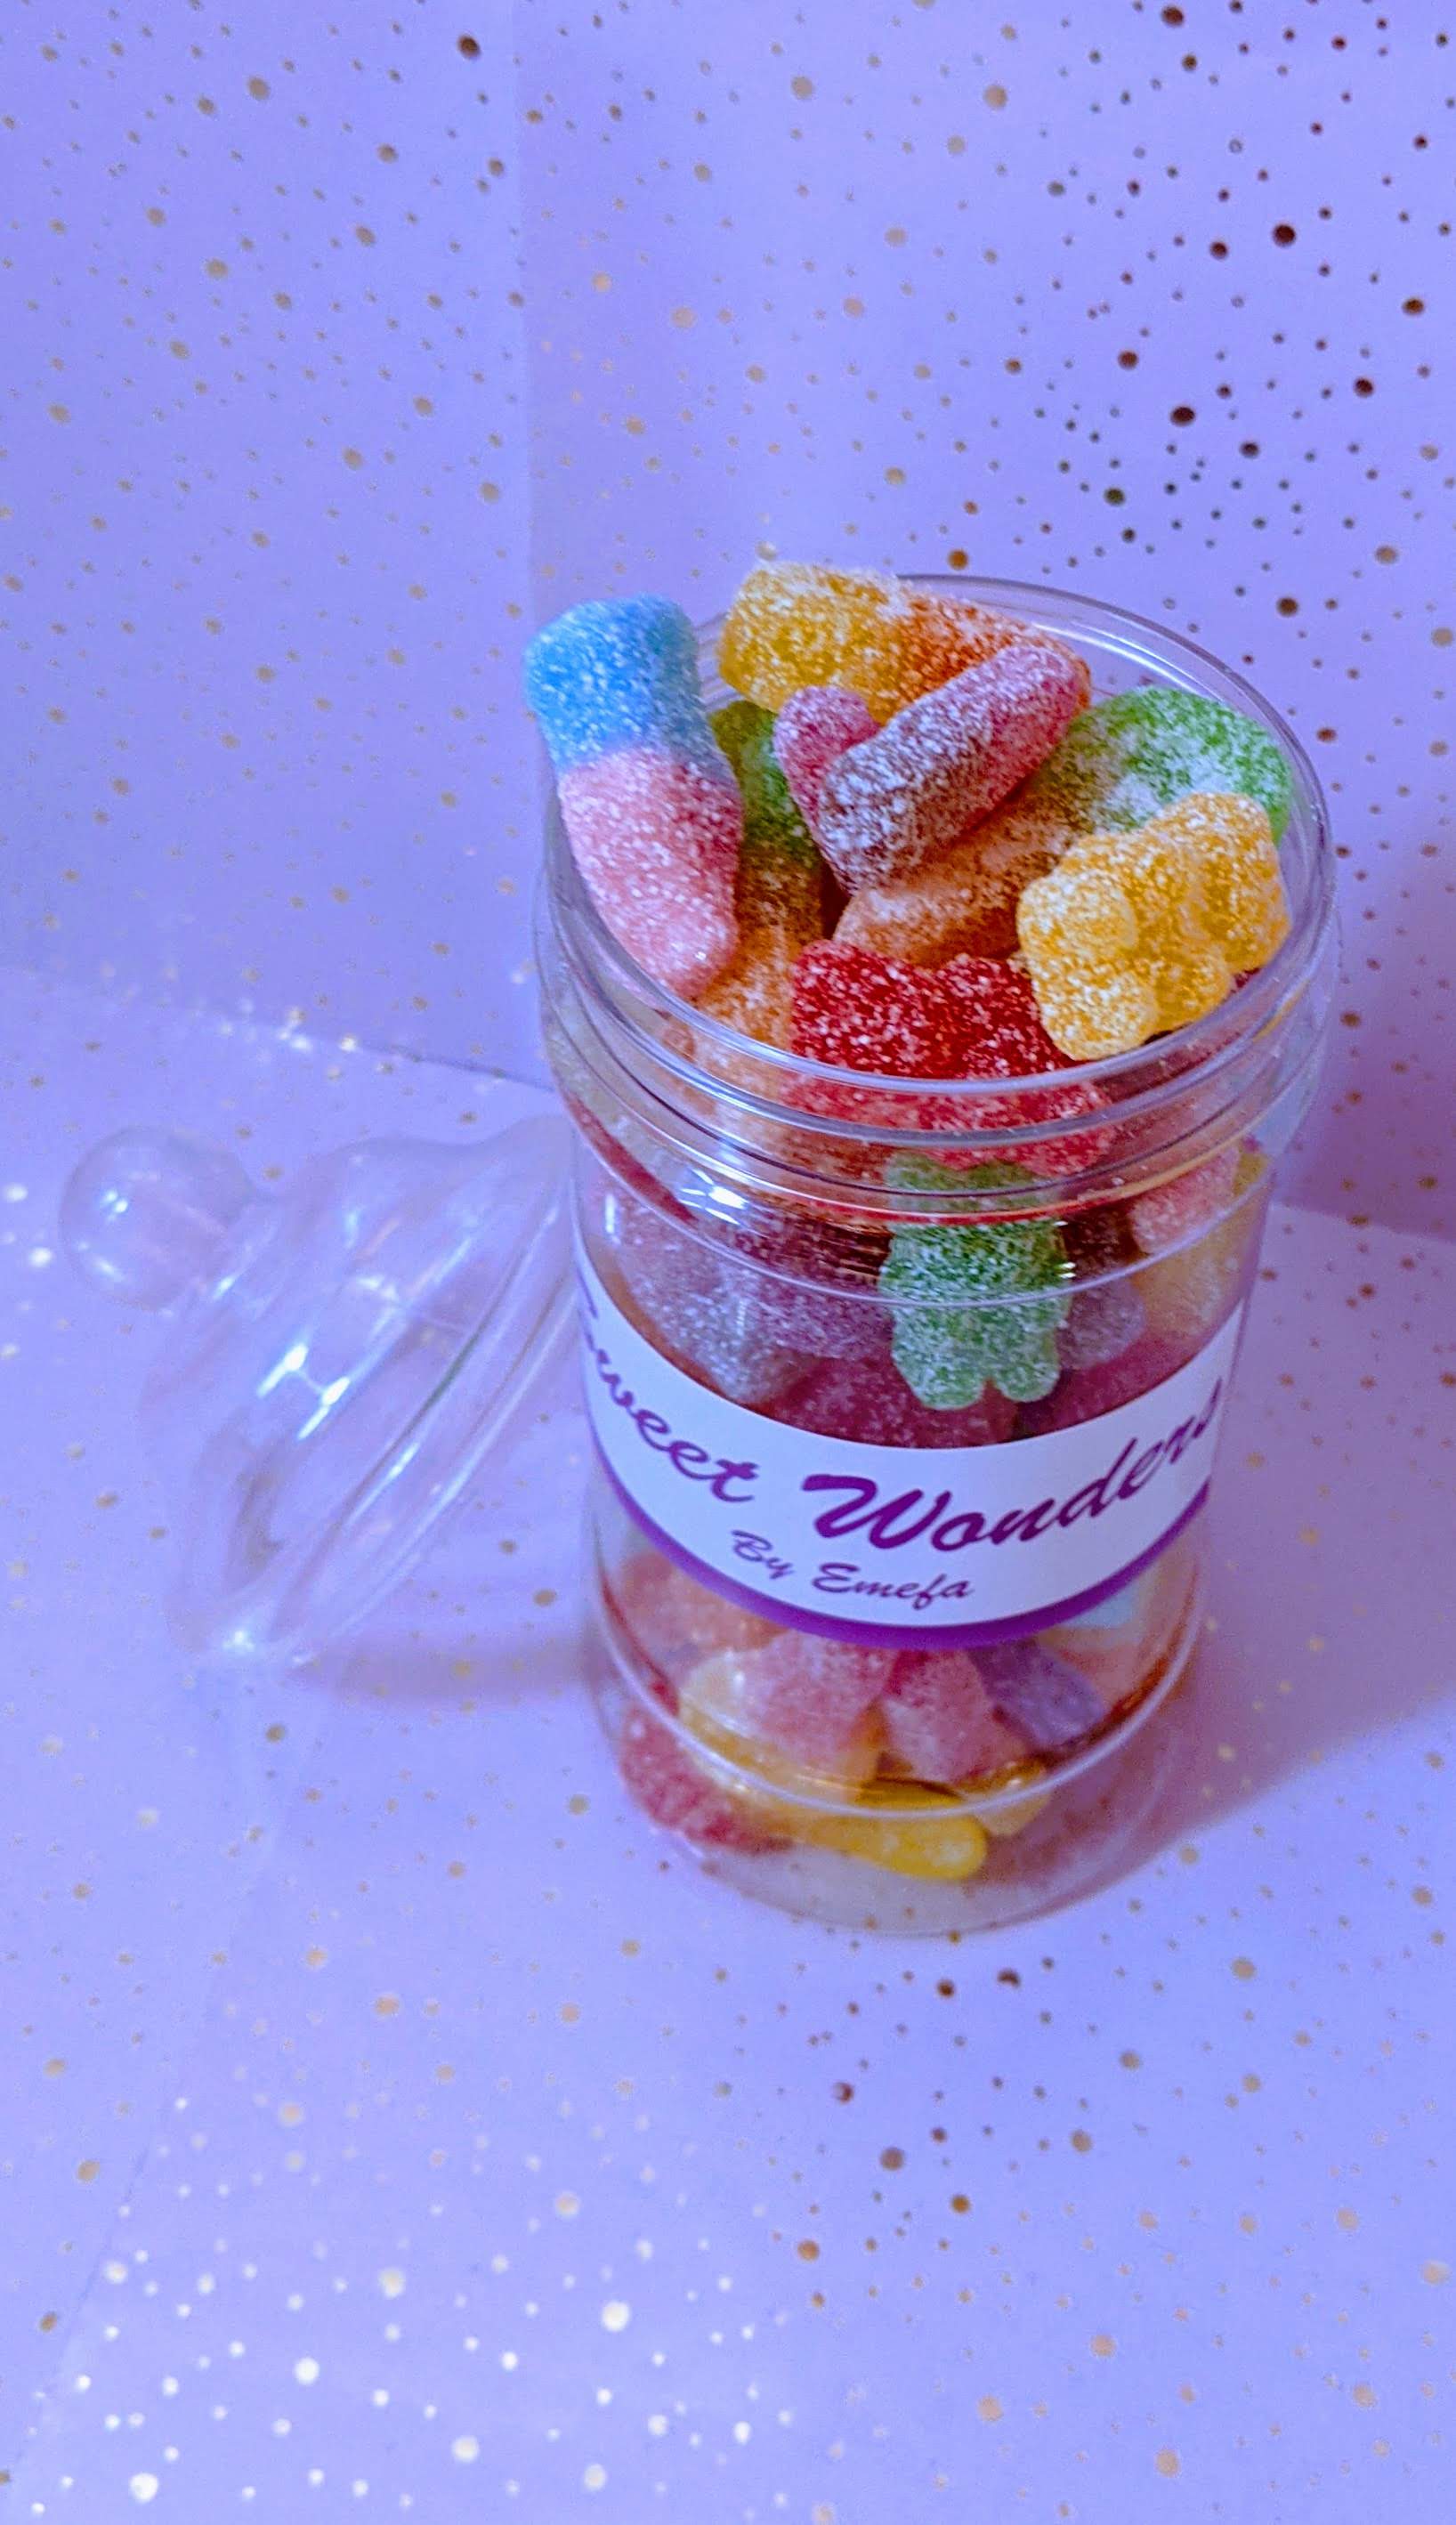 Sweets in customized Jars with Free Personalized Message in UK from Emefa